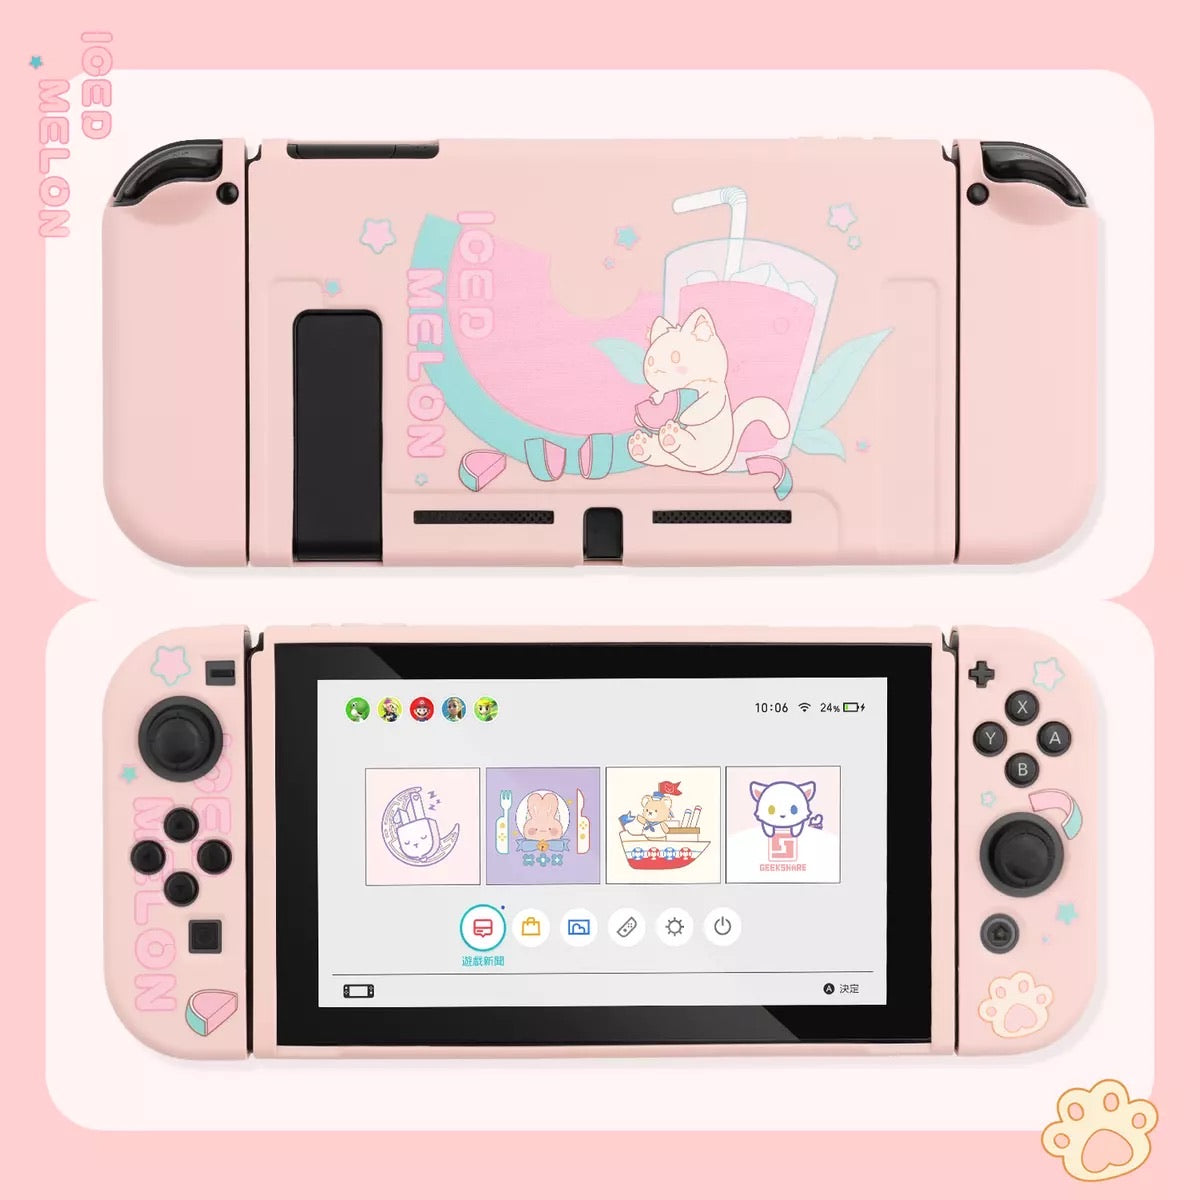 Iced Melon Cat Pink Pastel colors__Nintendo Switch Protection Casing Cover